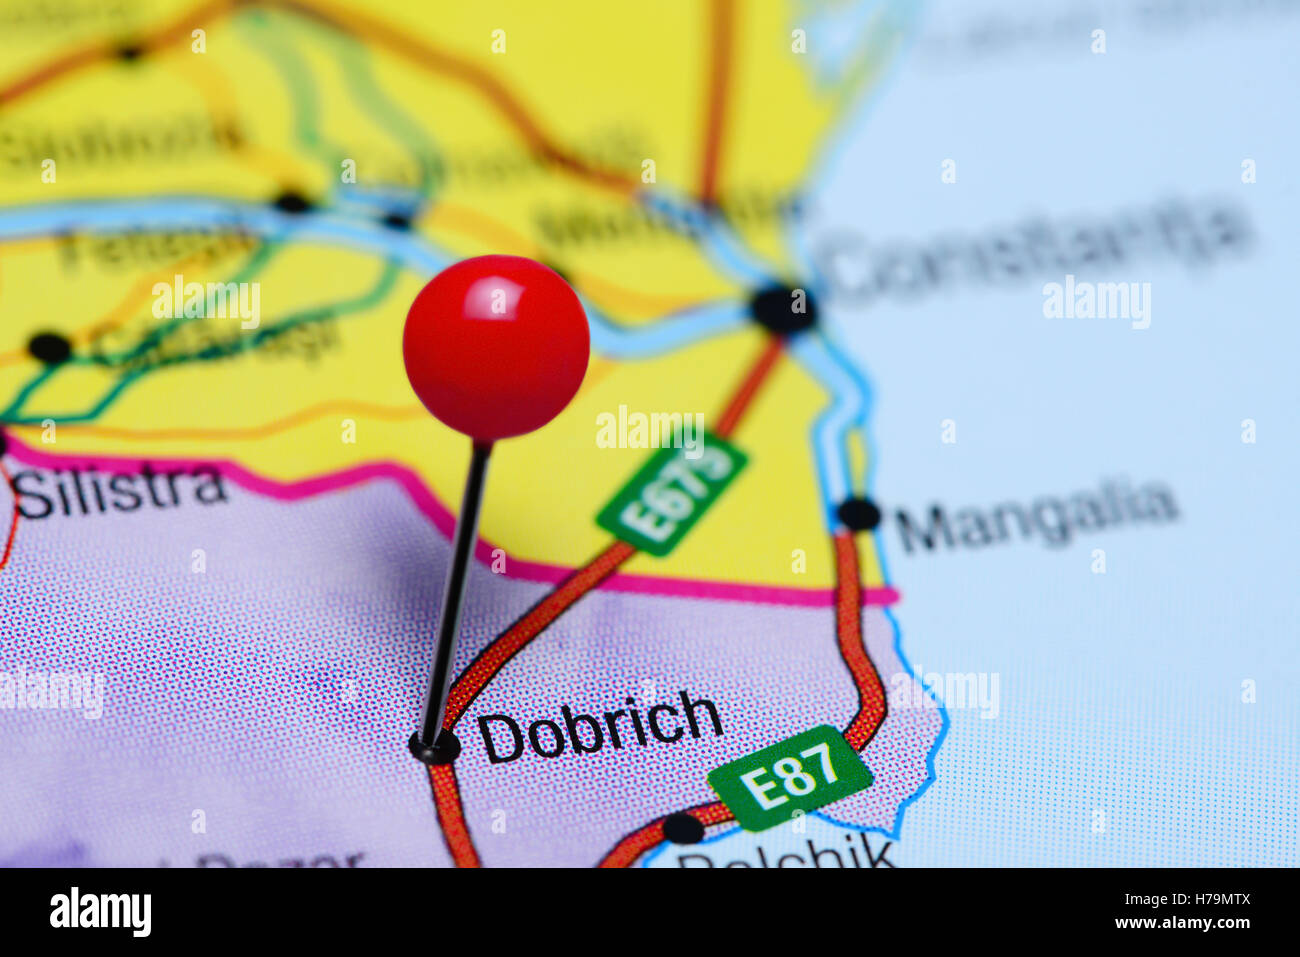 Dobrich pinned on a map of Bulgaria Stock Photo